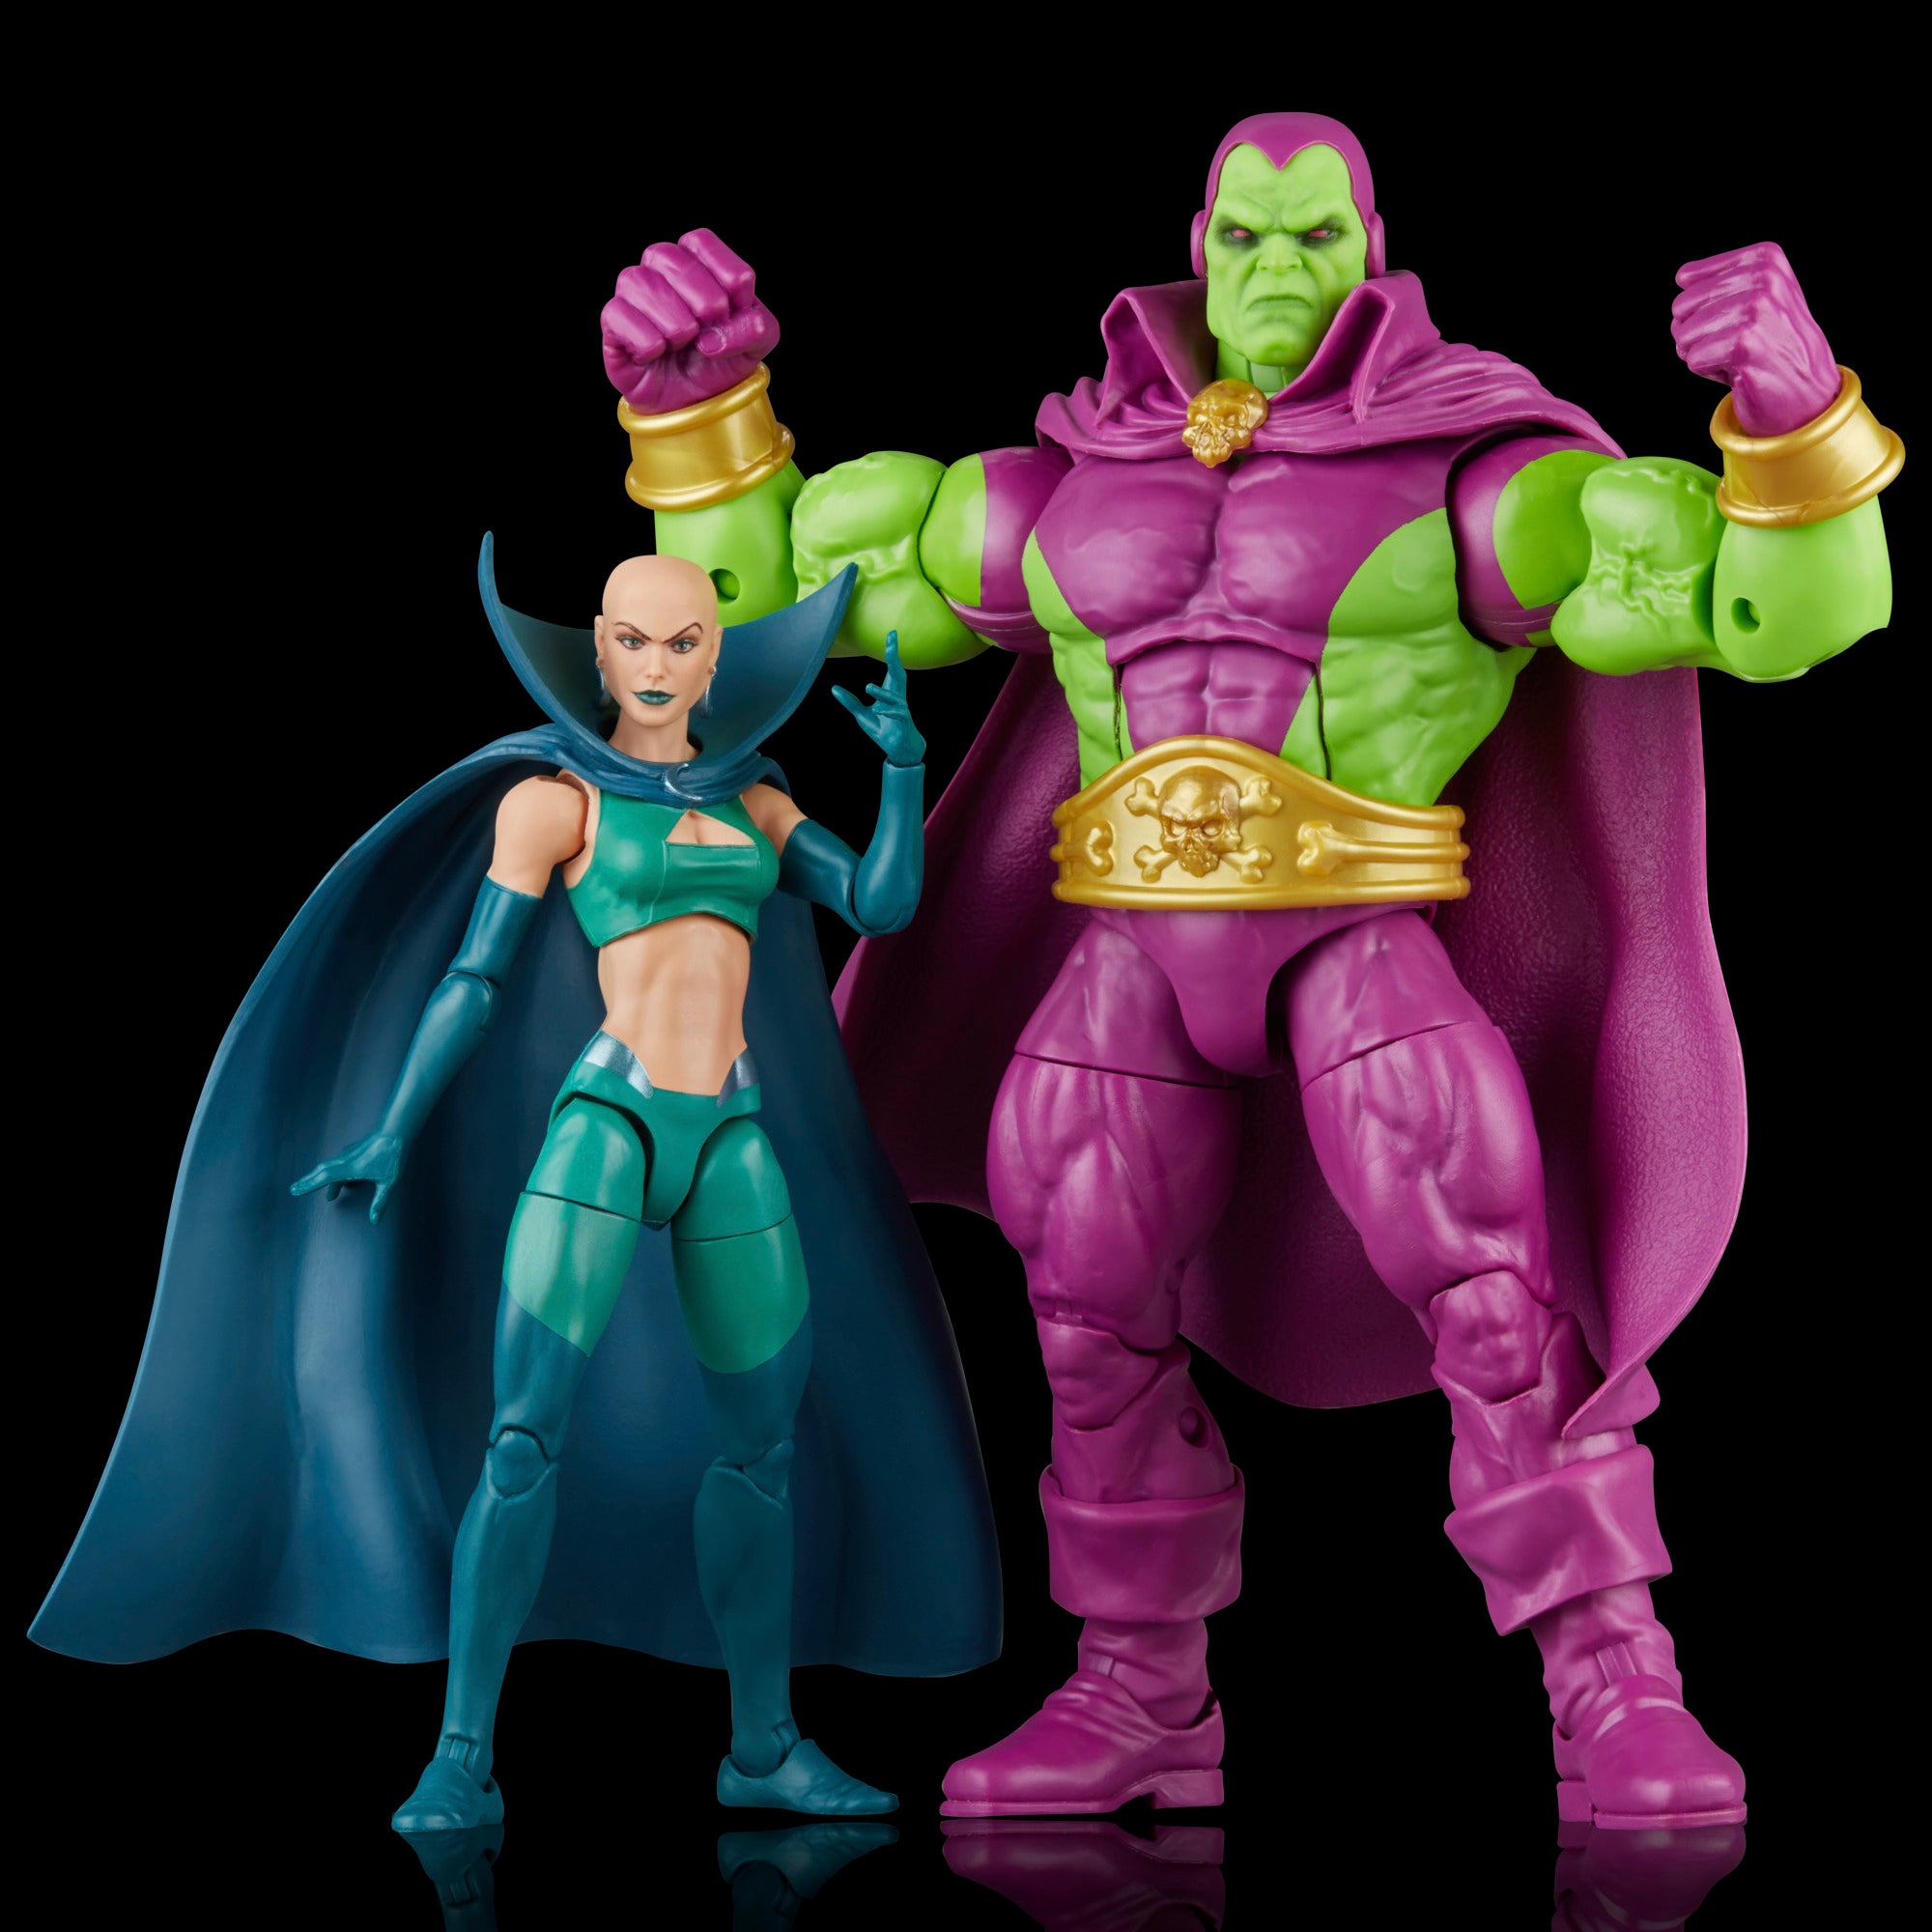 Marvel Legends: Drax and Moondragon 2-pack revealed